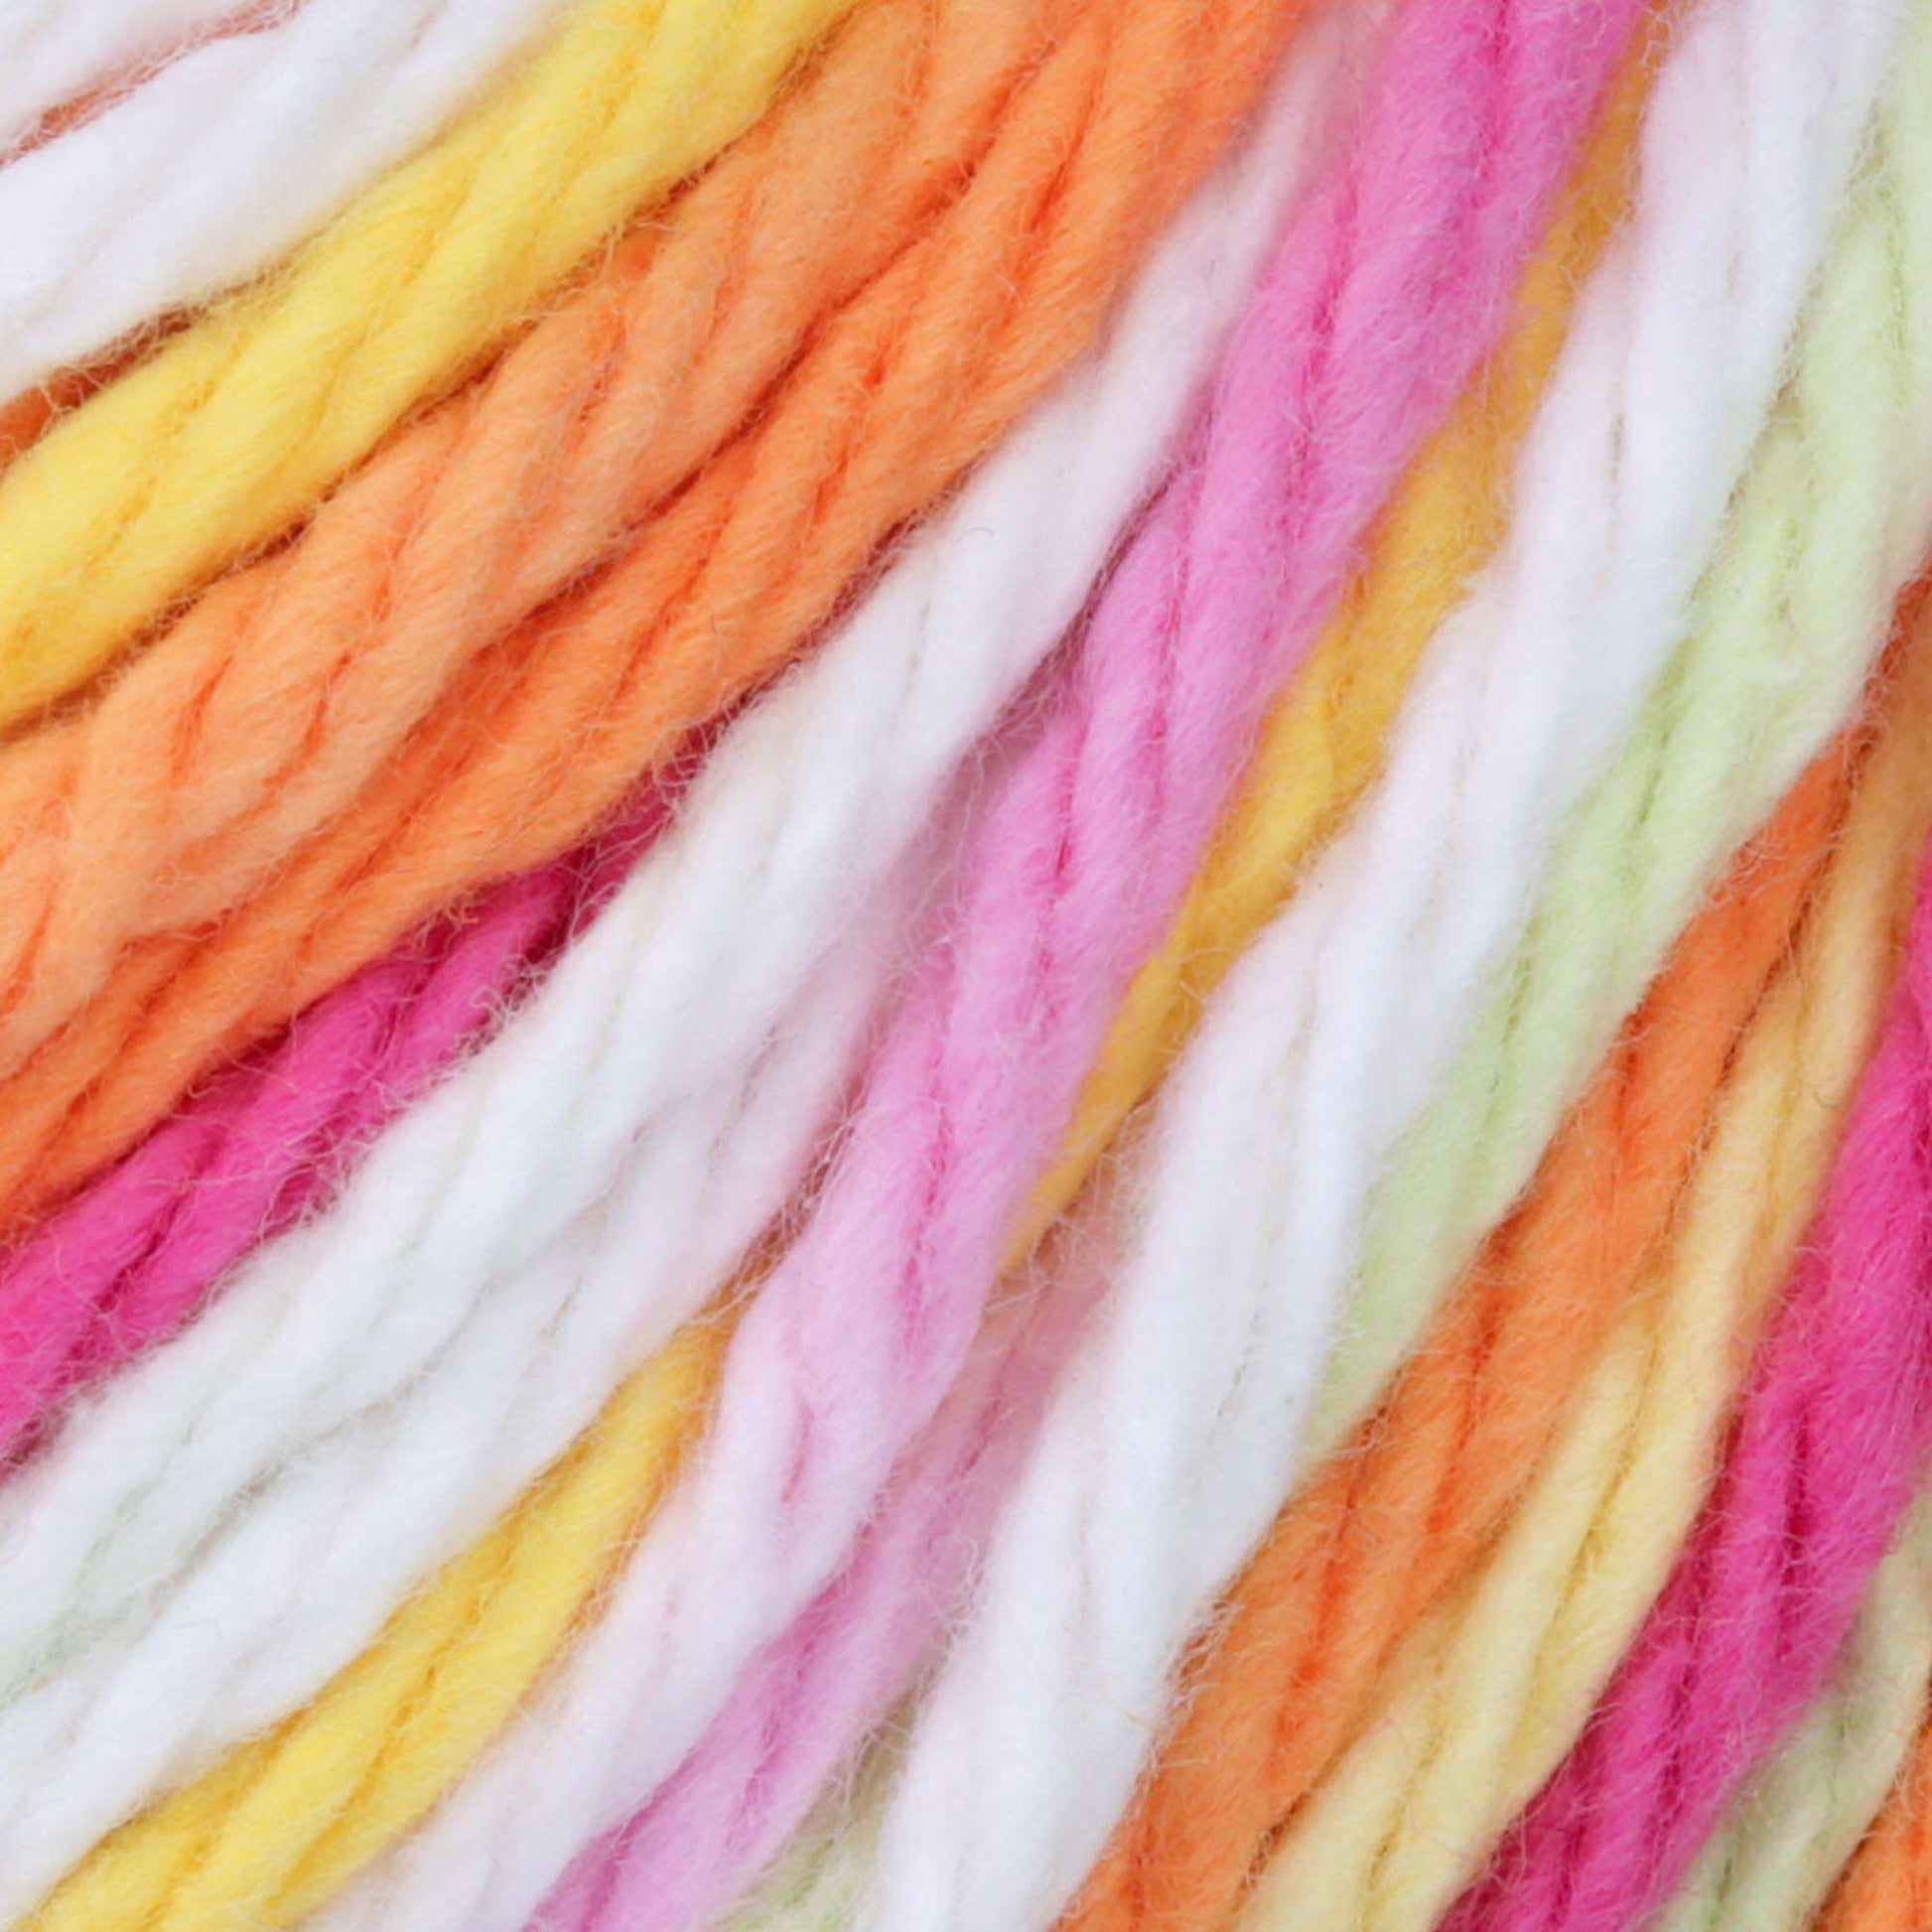 Lily Sugar'n Cream Super Size Ombres Yarn Over the Rainbow